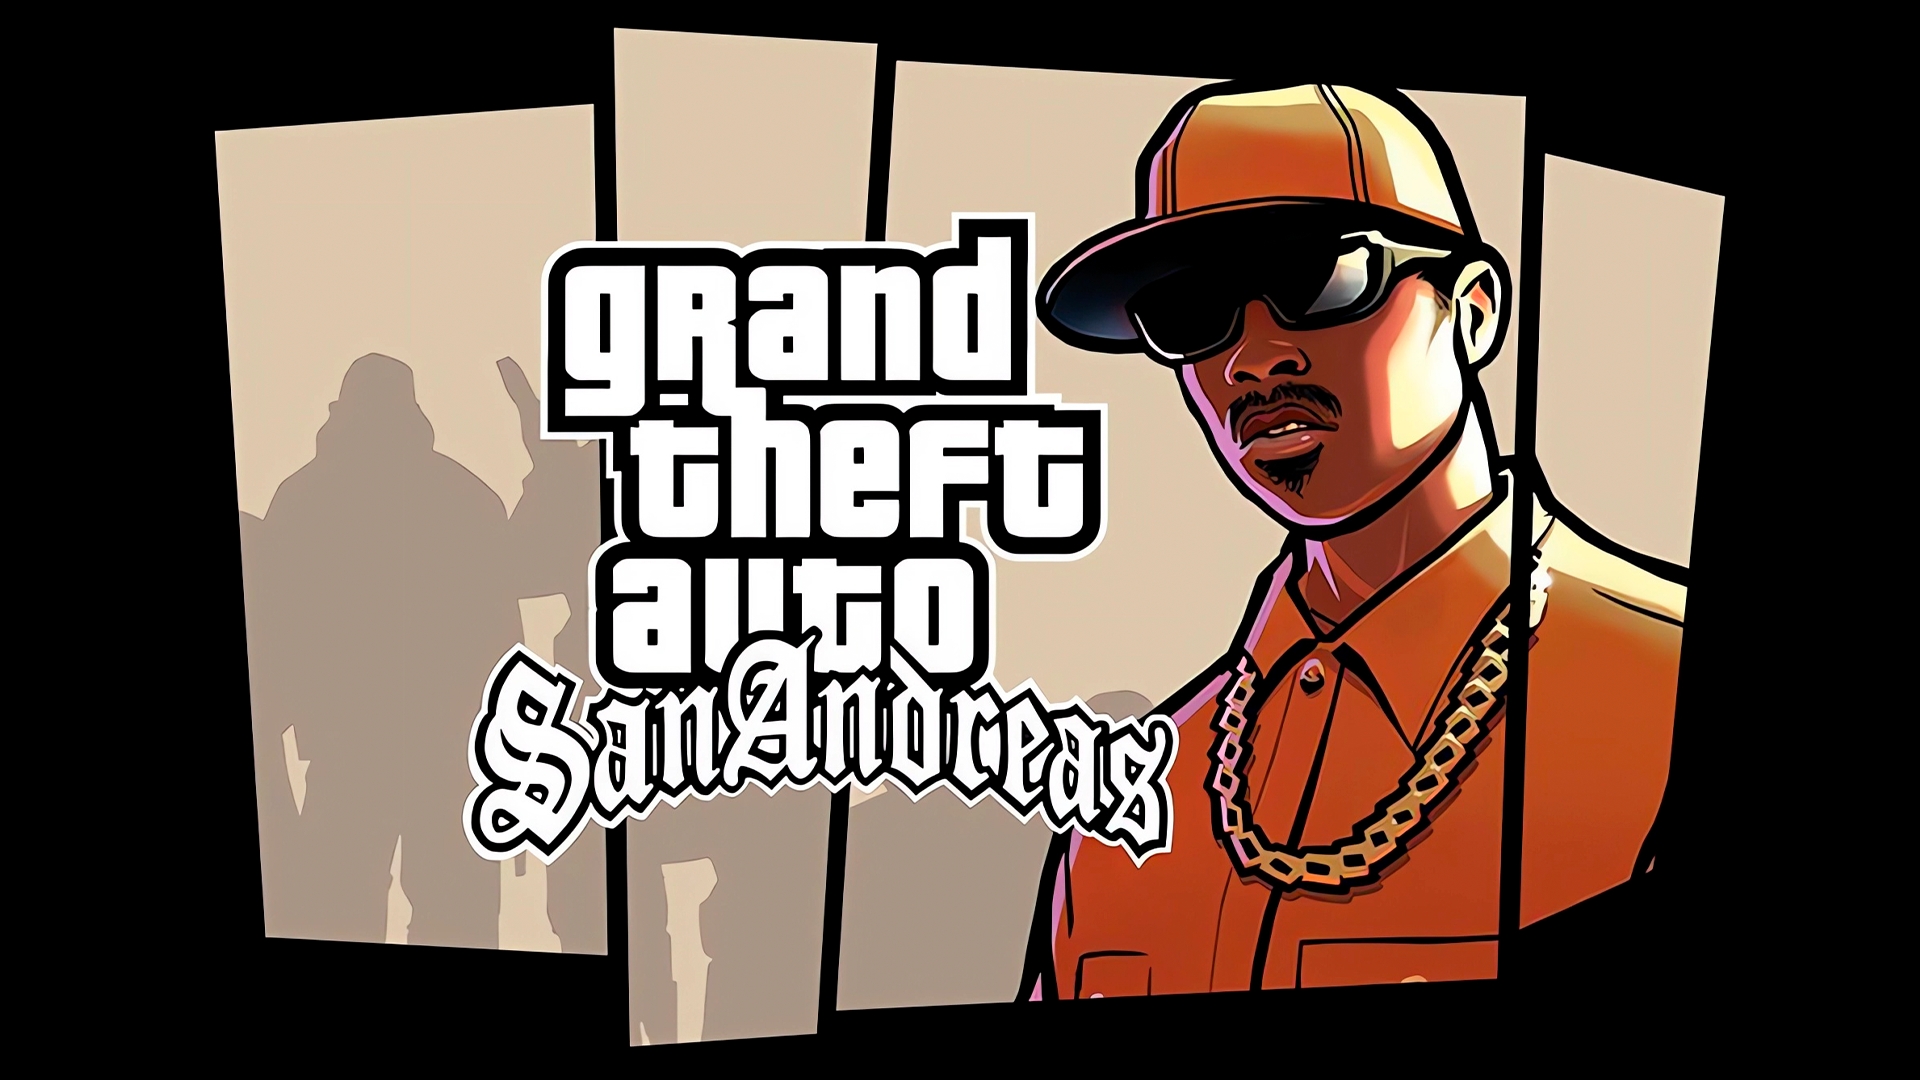 Grand Theft Auto: San Andreas 2nd Ed DVD for Windows PC by